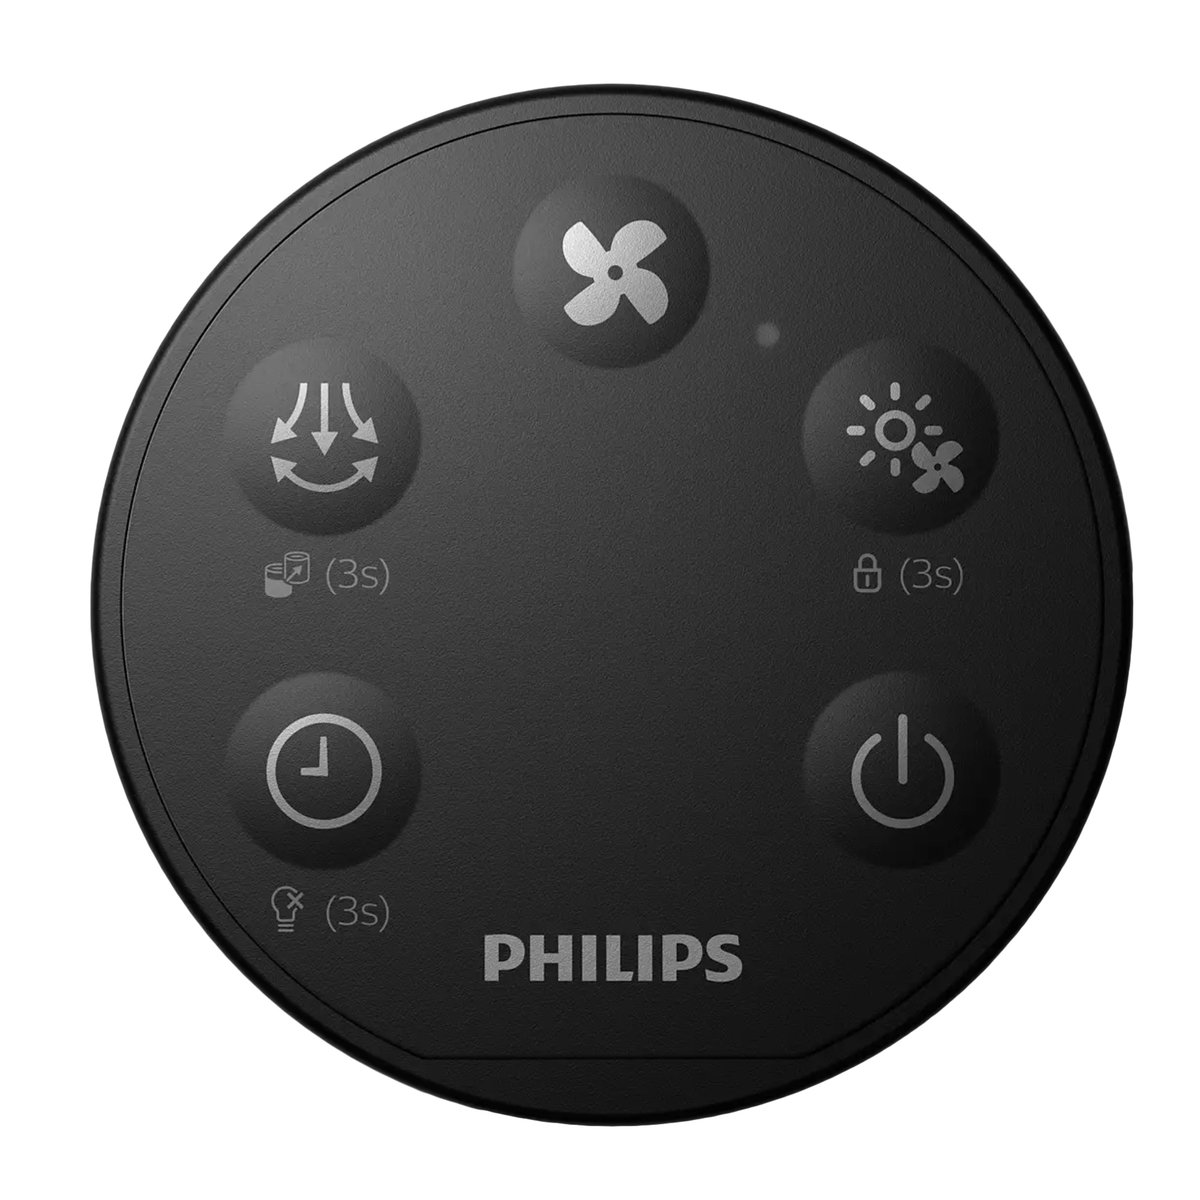 Philips 3 in 1 Air Purifier AMF220/95